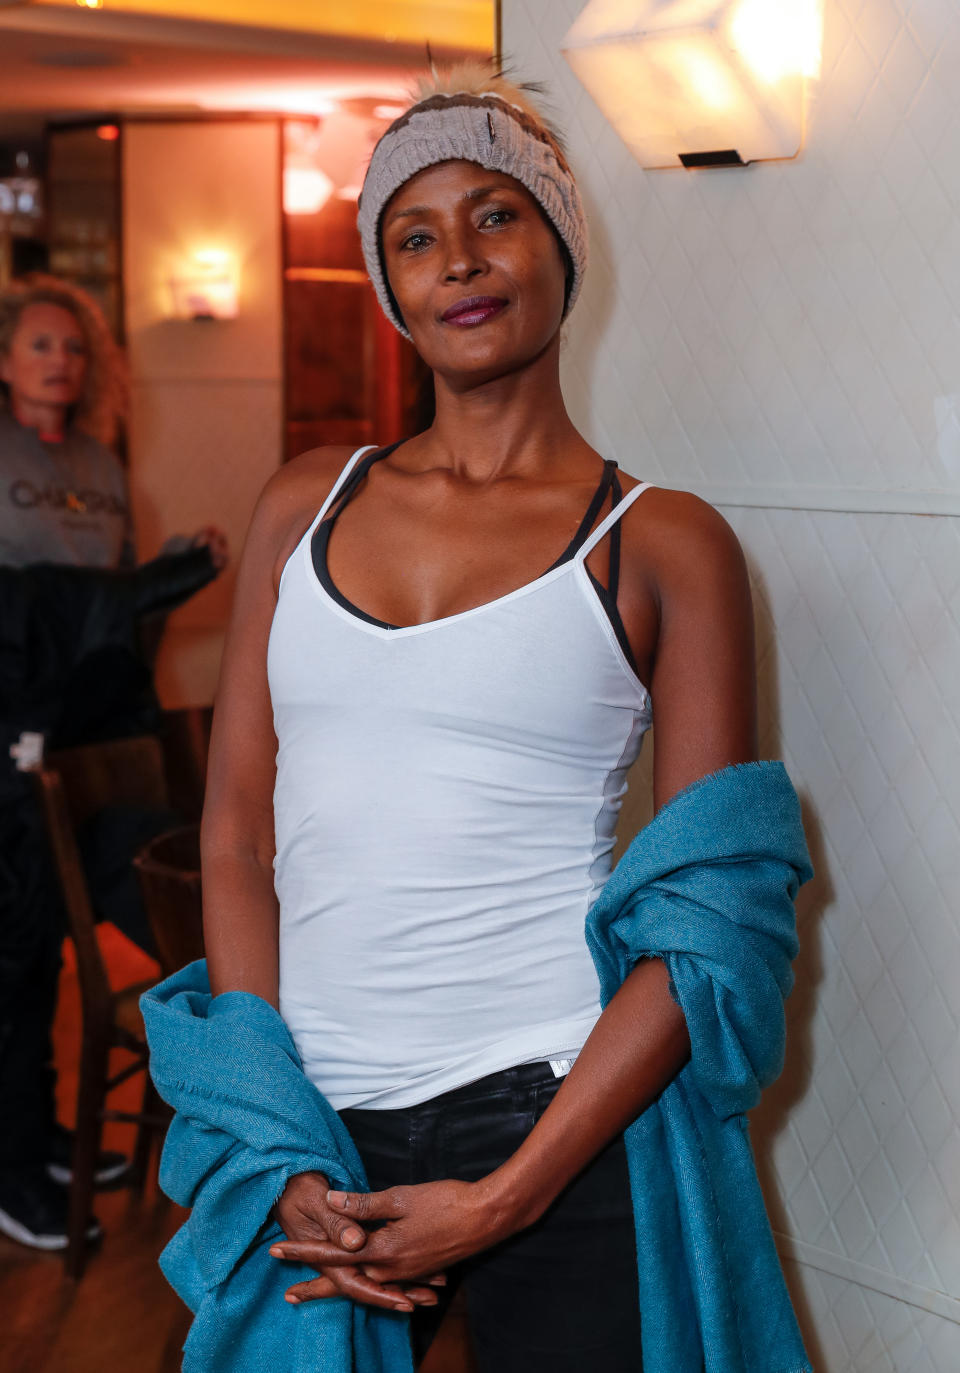 Waris Dirie attends a drinks reception for the “Break The Silence: The Fight Against FGM” panel discussion at The Club at The Ivy in 2019. (Photo: David M. Benett/Dave Benett/Getty Images)